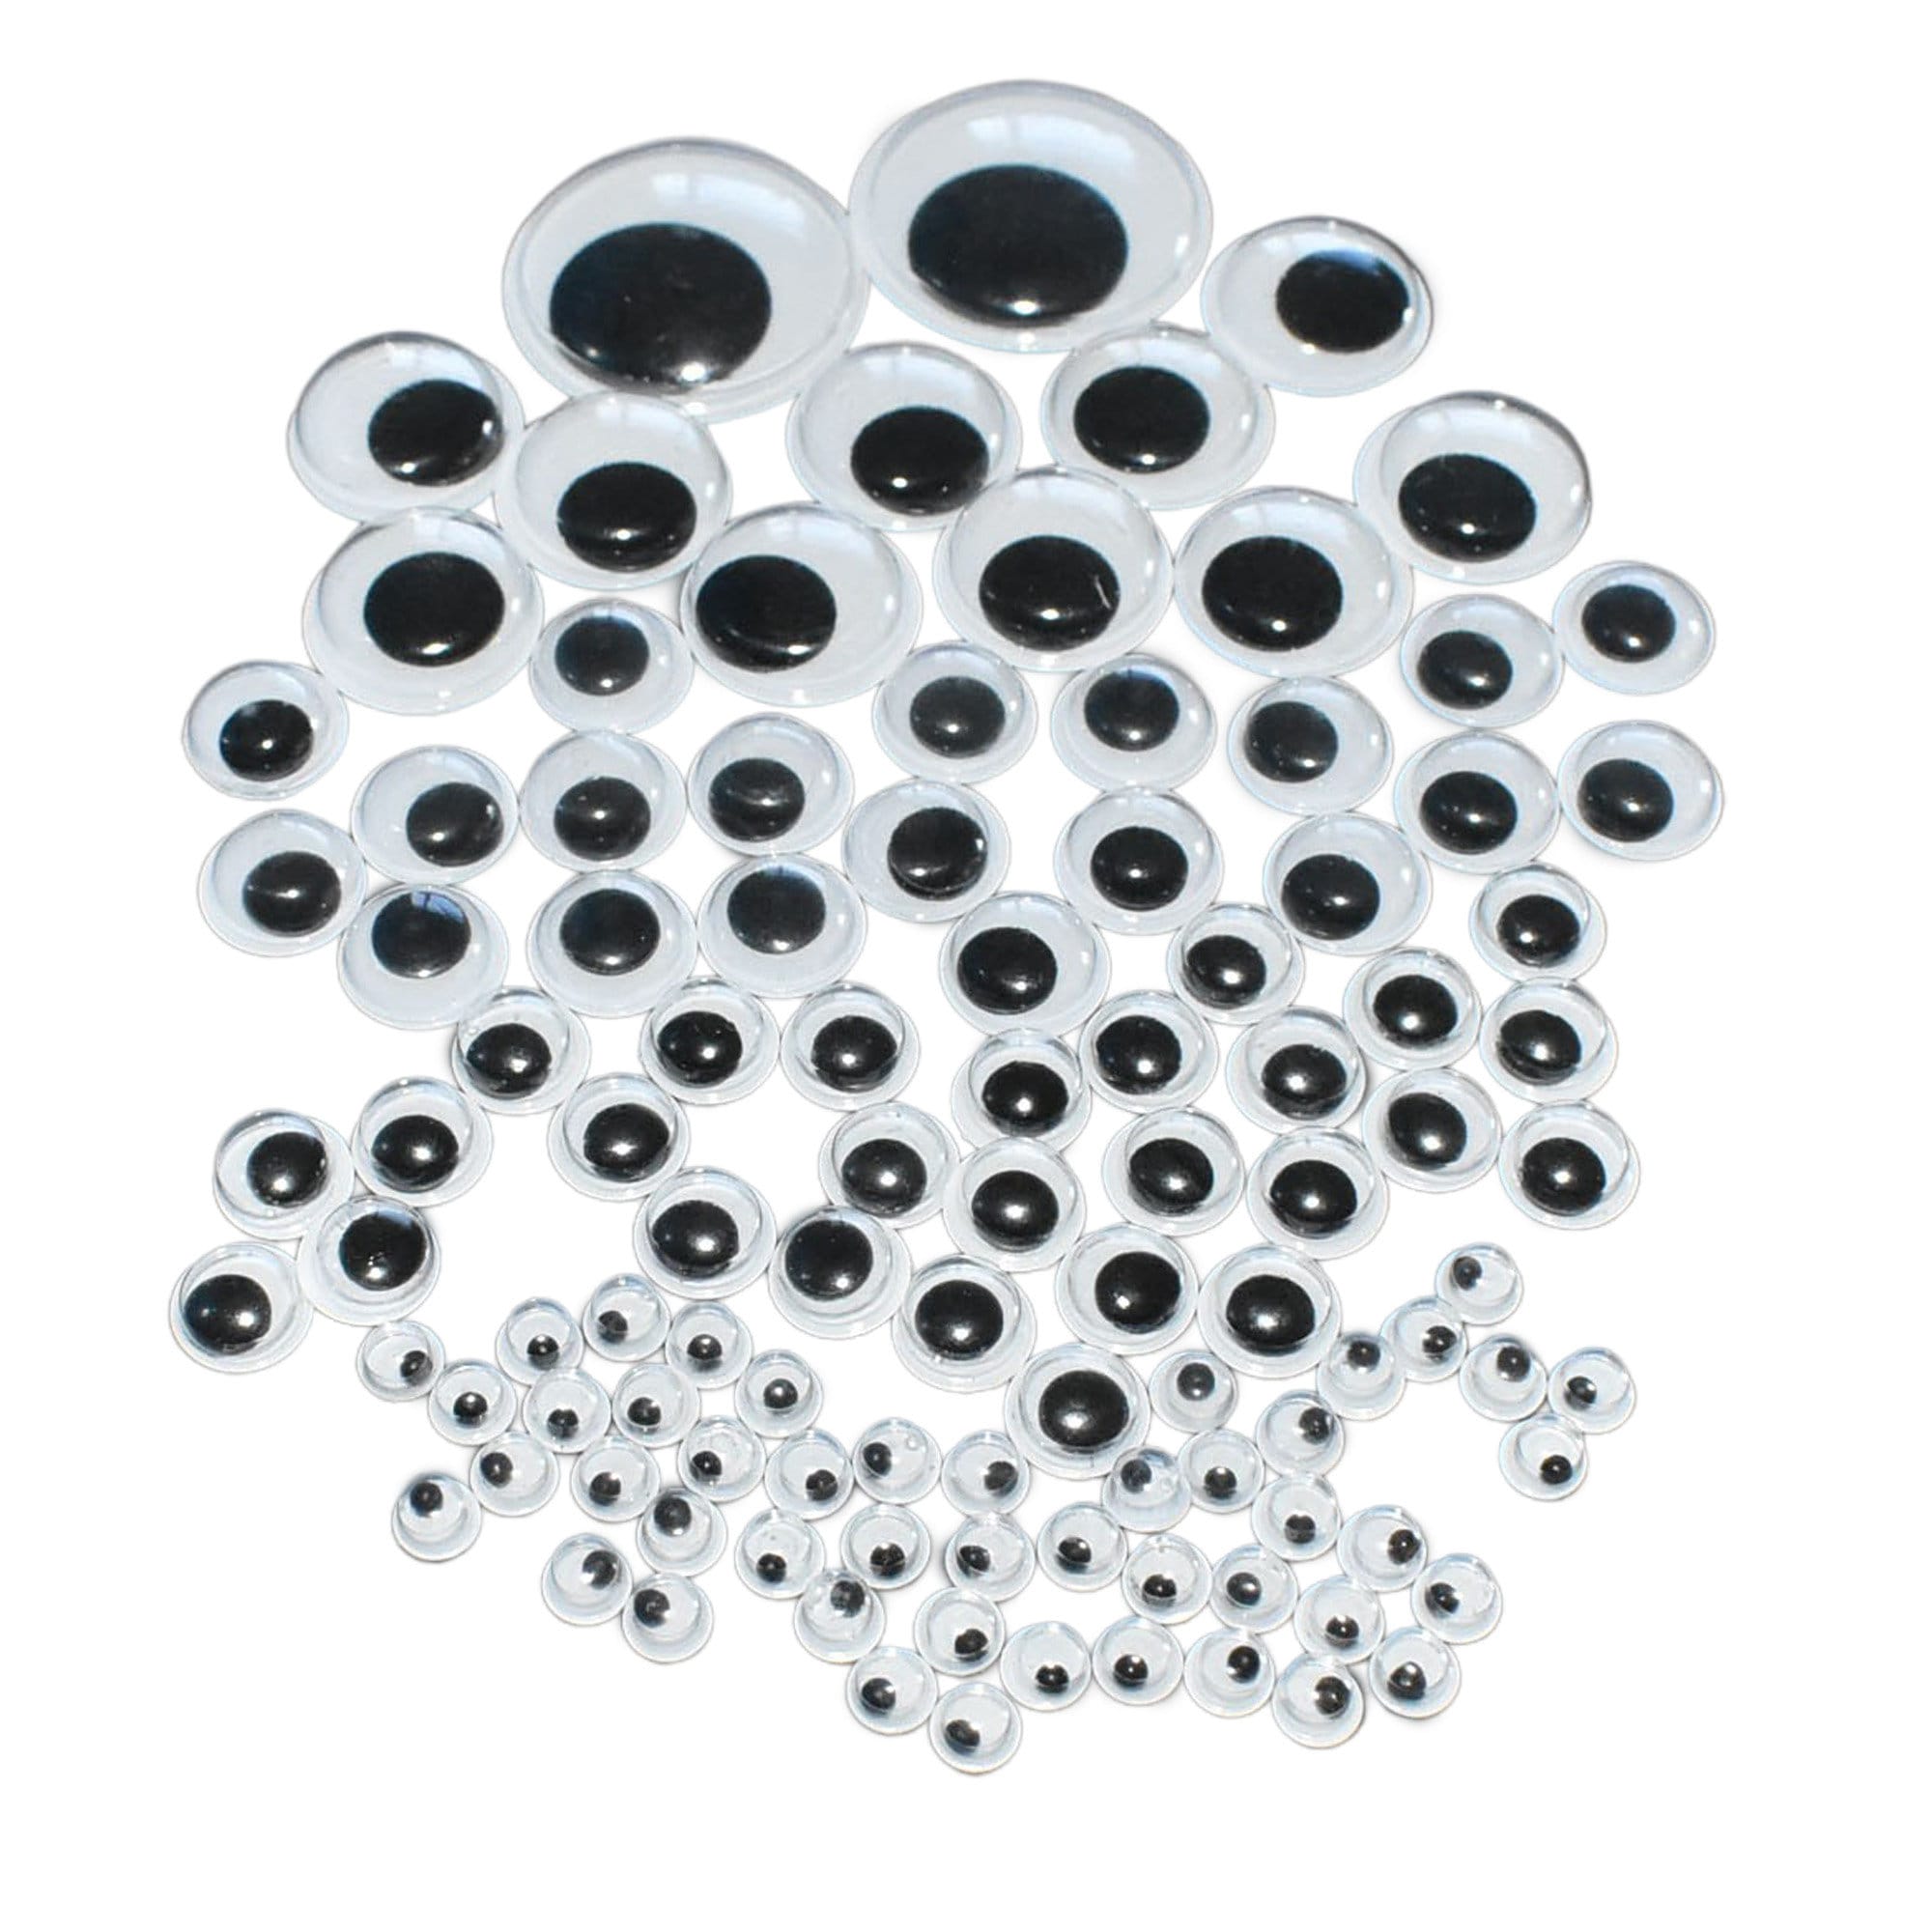 Googly Eyes for Crafts, Black and White Craft Eyes, Googly Eyes for Crafting,  Googly Eyes, Eyes for Crafts, Crafting Eyes 